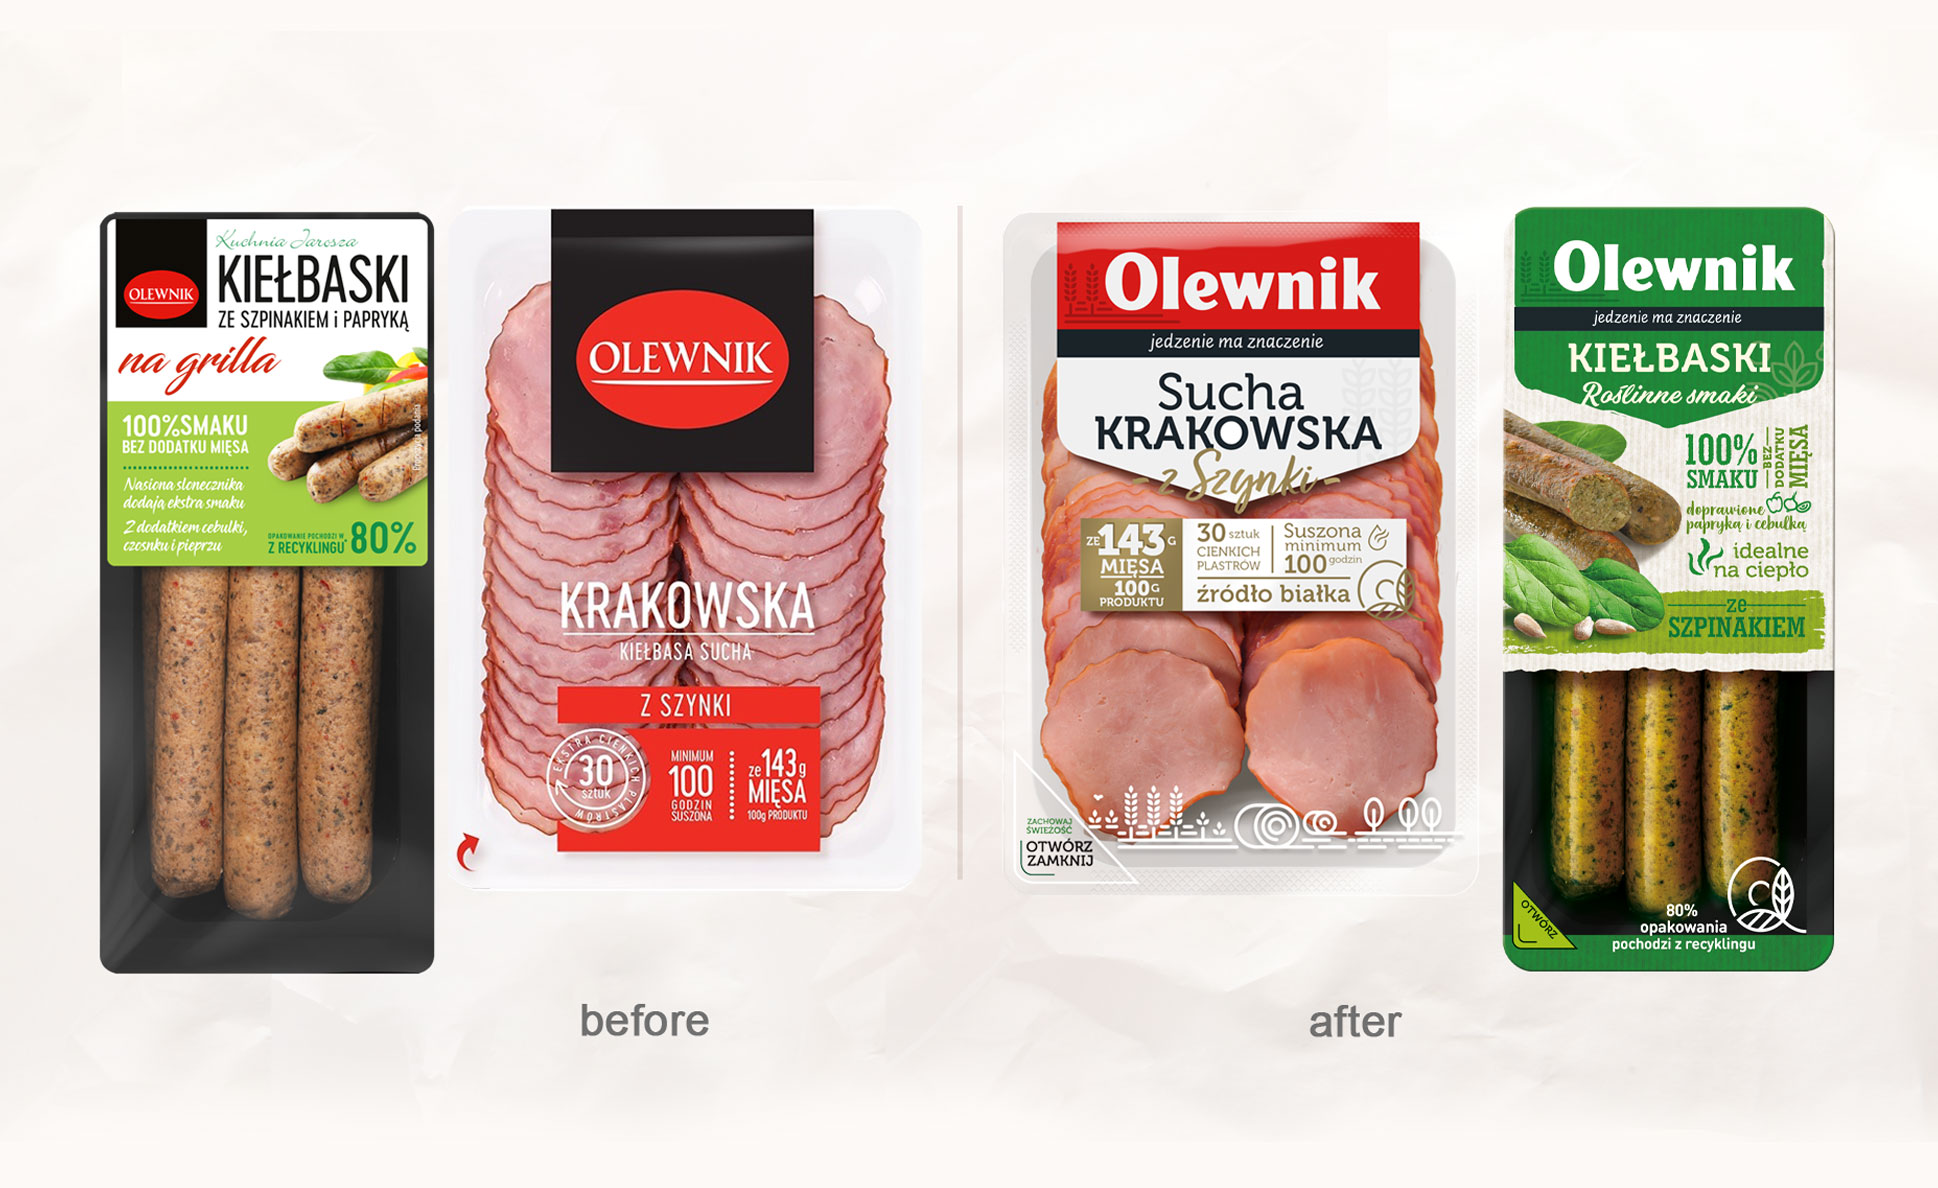 Olewnik - photos of products before and after rebranding